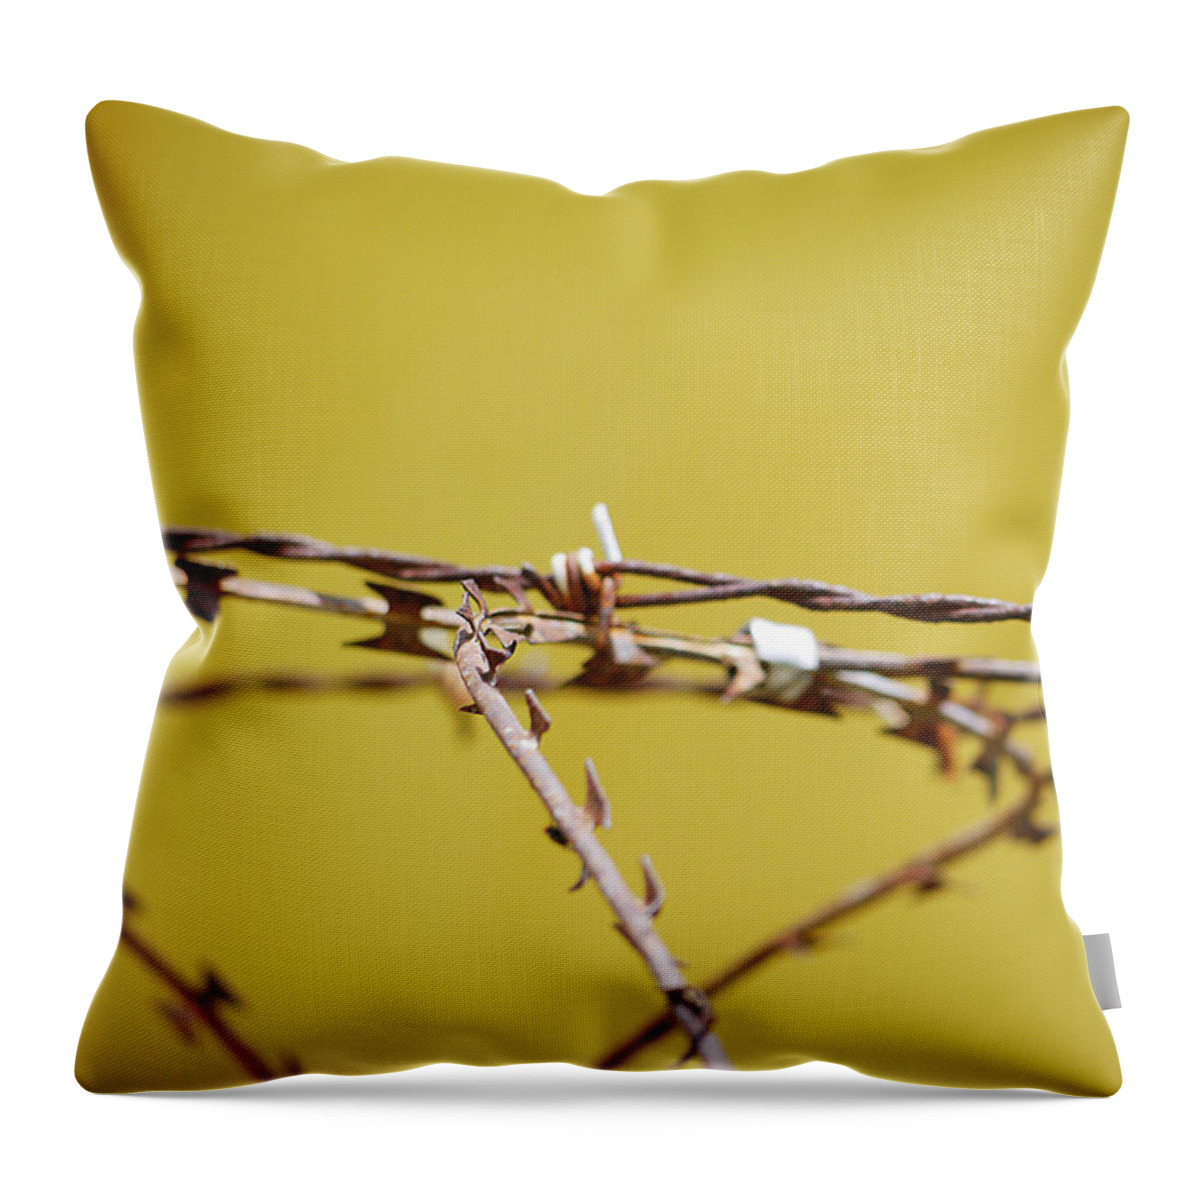 Richard Reeve Throw Pillow featuring the photograph Steel Thorns by Richard Reeve